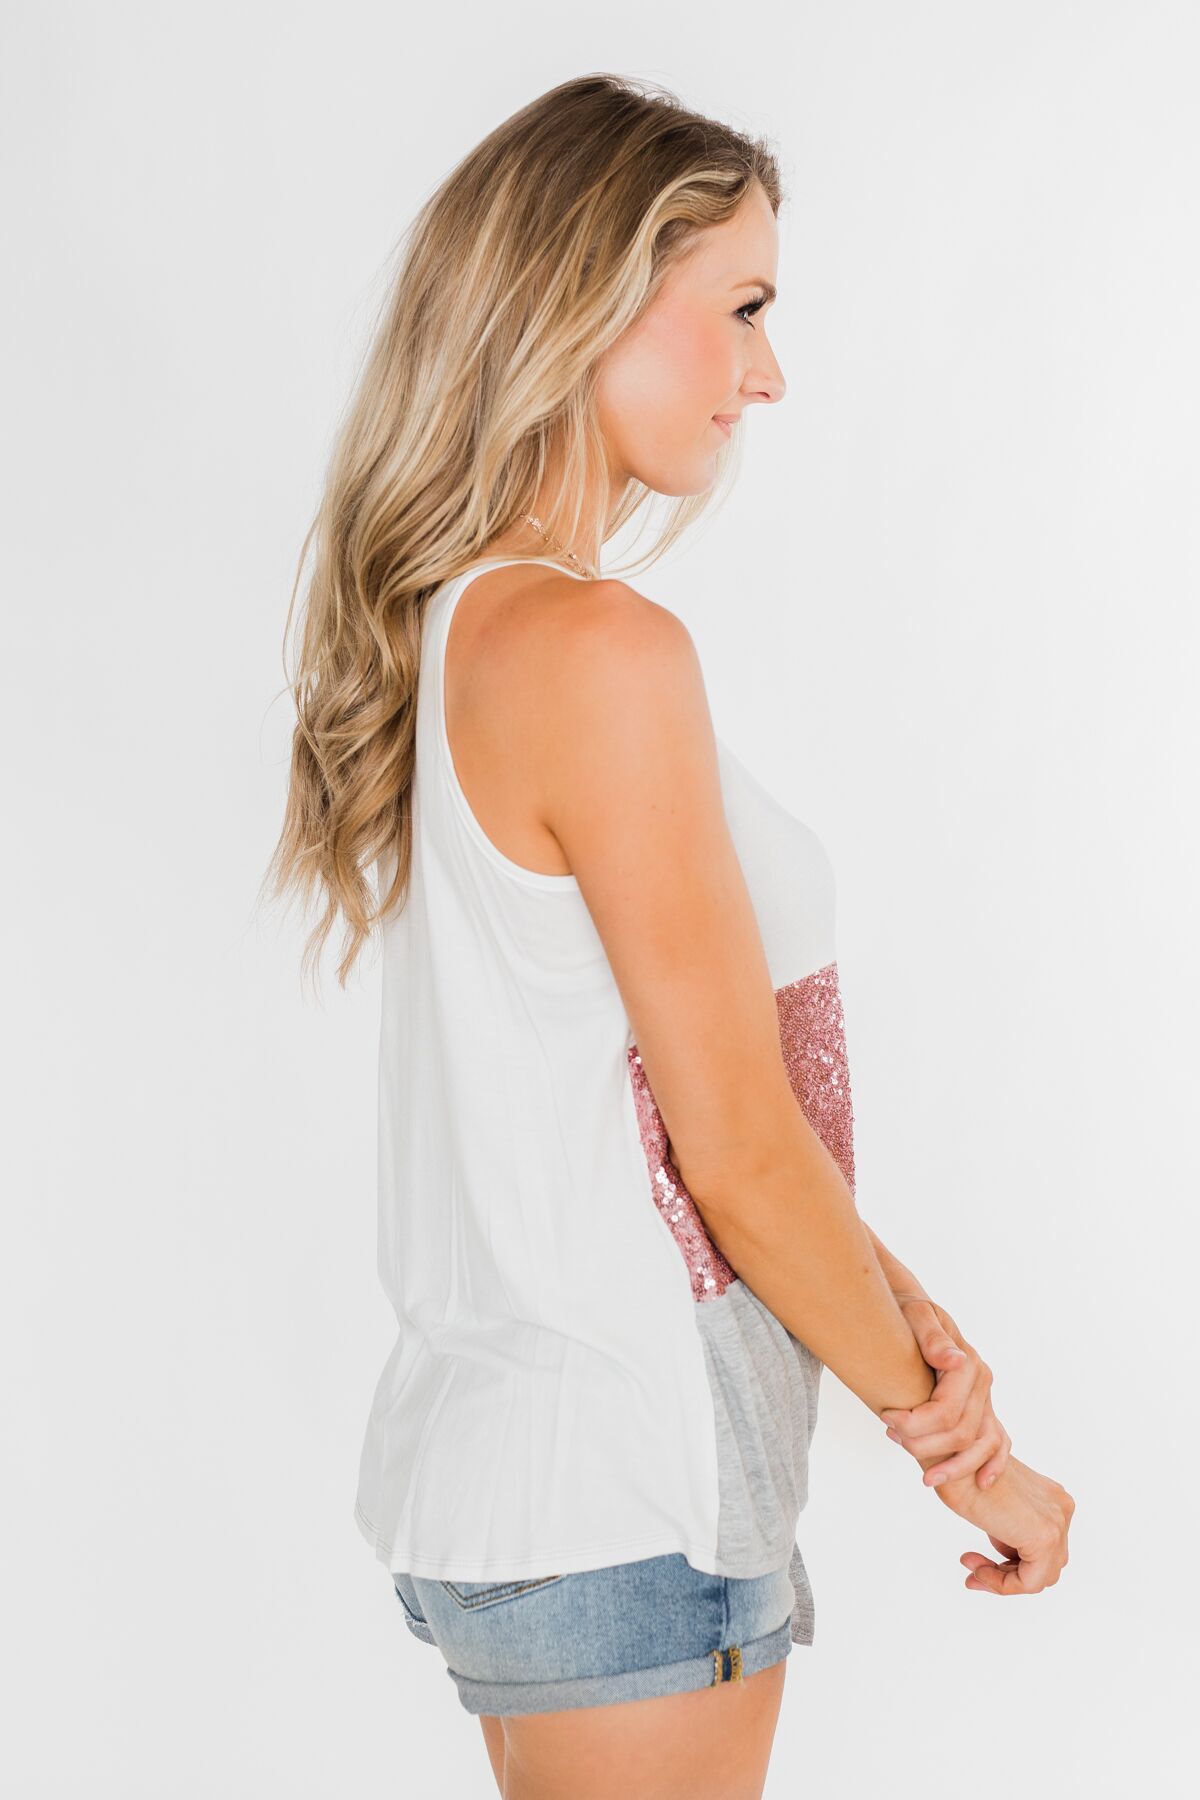 Full Of Sparkle Front Knot Halter Top- Ivory, Pink, & Gray